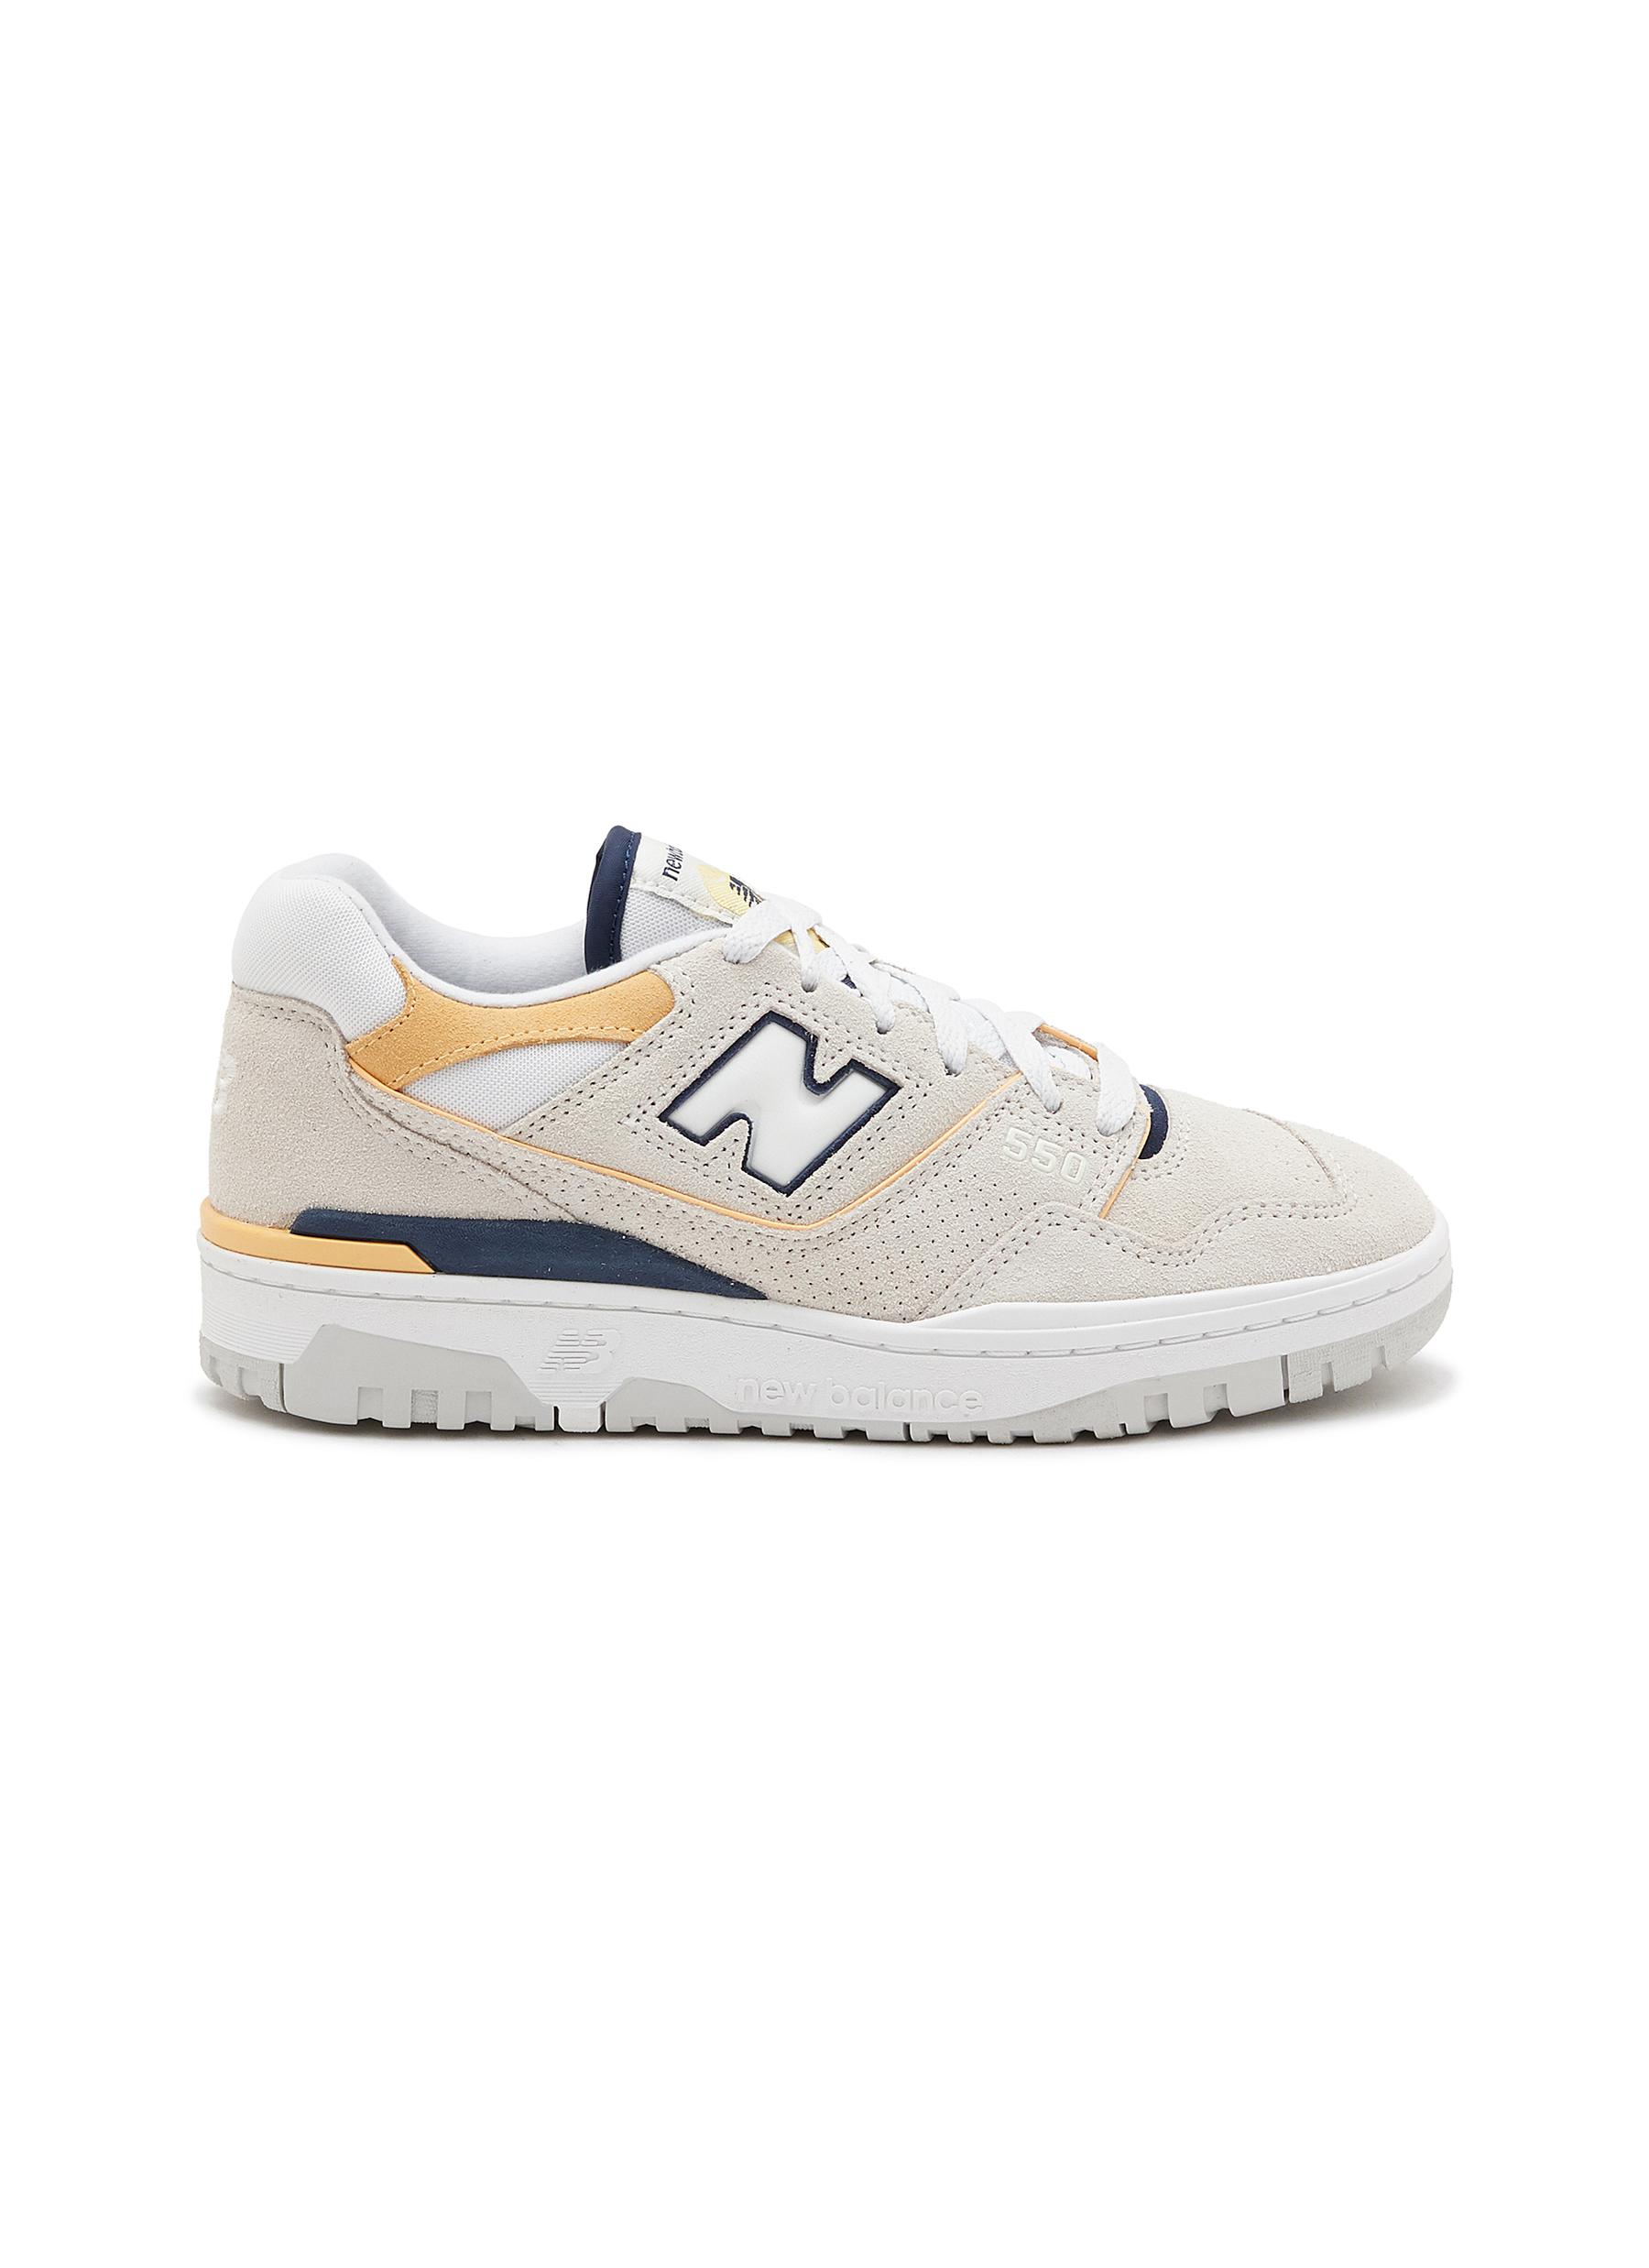 NEW BALANCE '550' Low Top Lace Up Sneakers